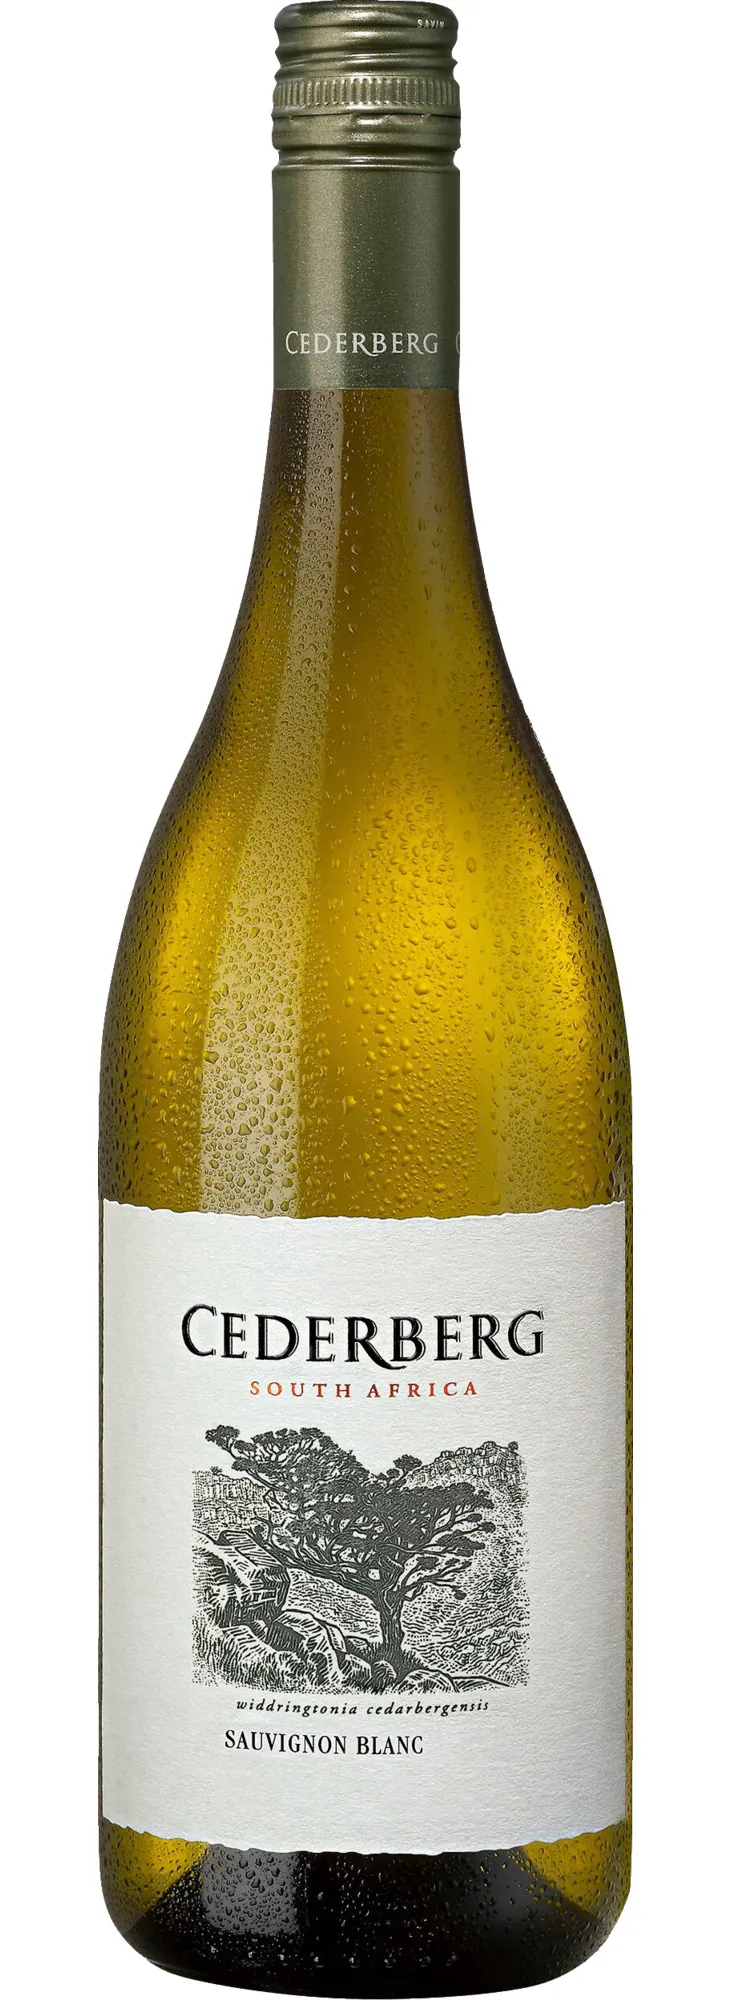 Bottle of Cederberg Sauvignon Blancwith label visible